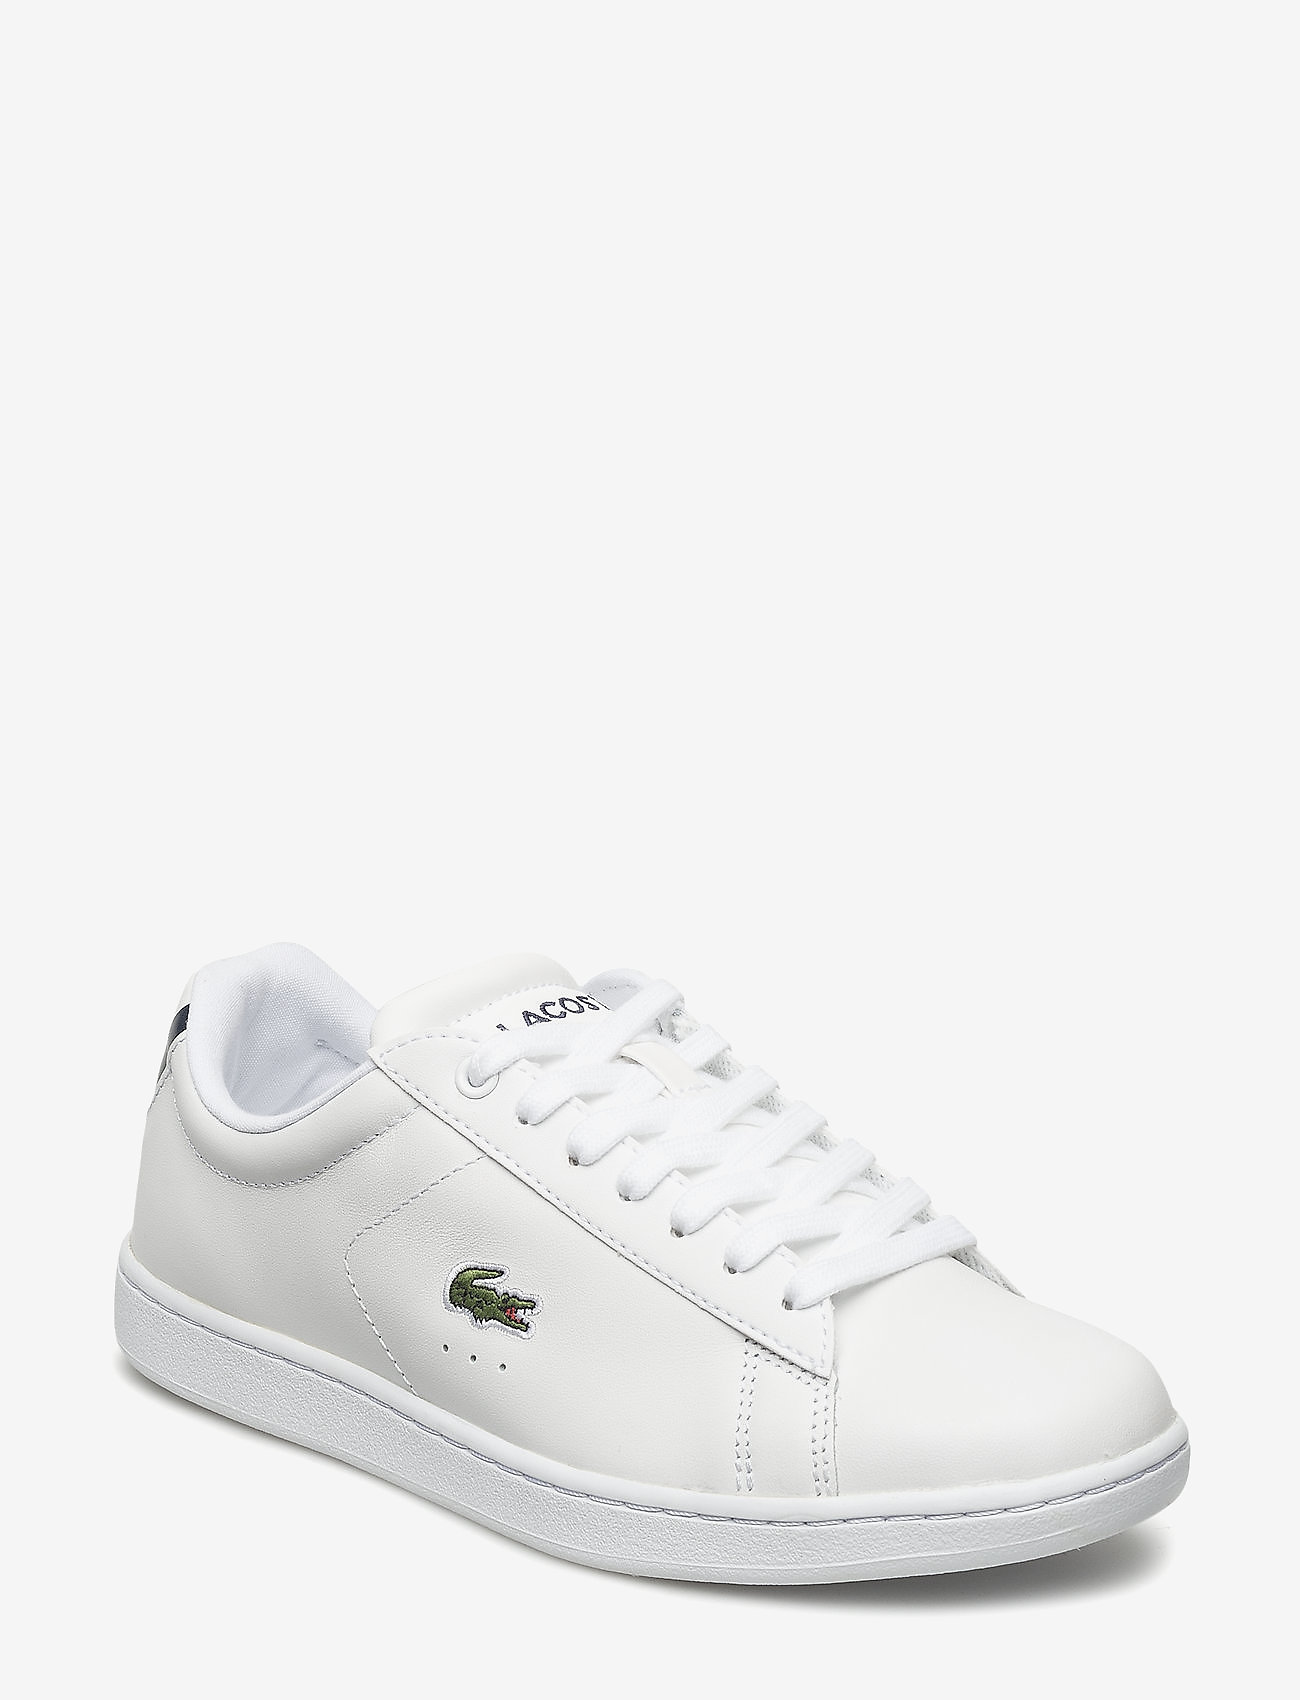 Lacoste Shoes - CARNABY EVO BL 1 SFA - low top sneakers - wht lth - 0